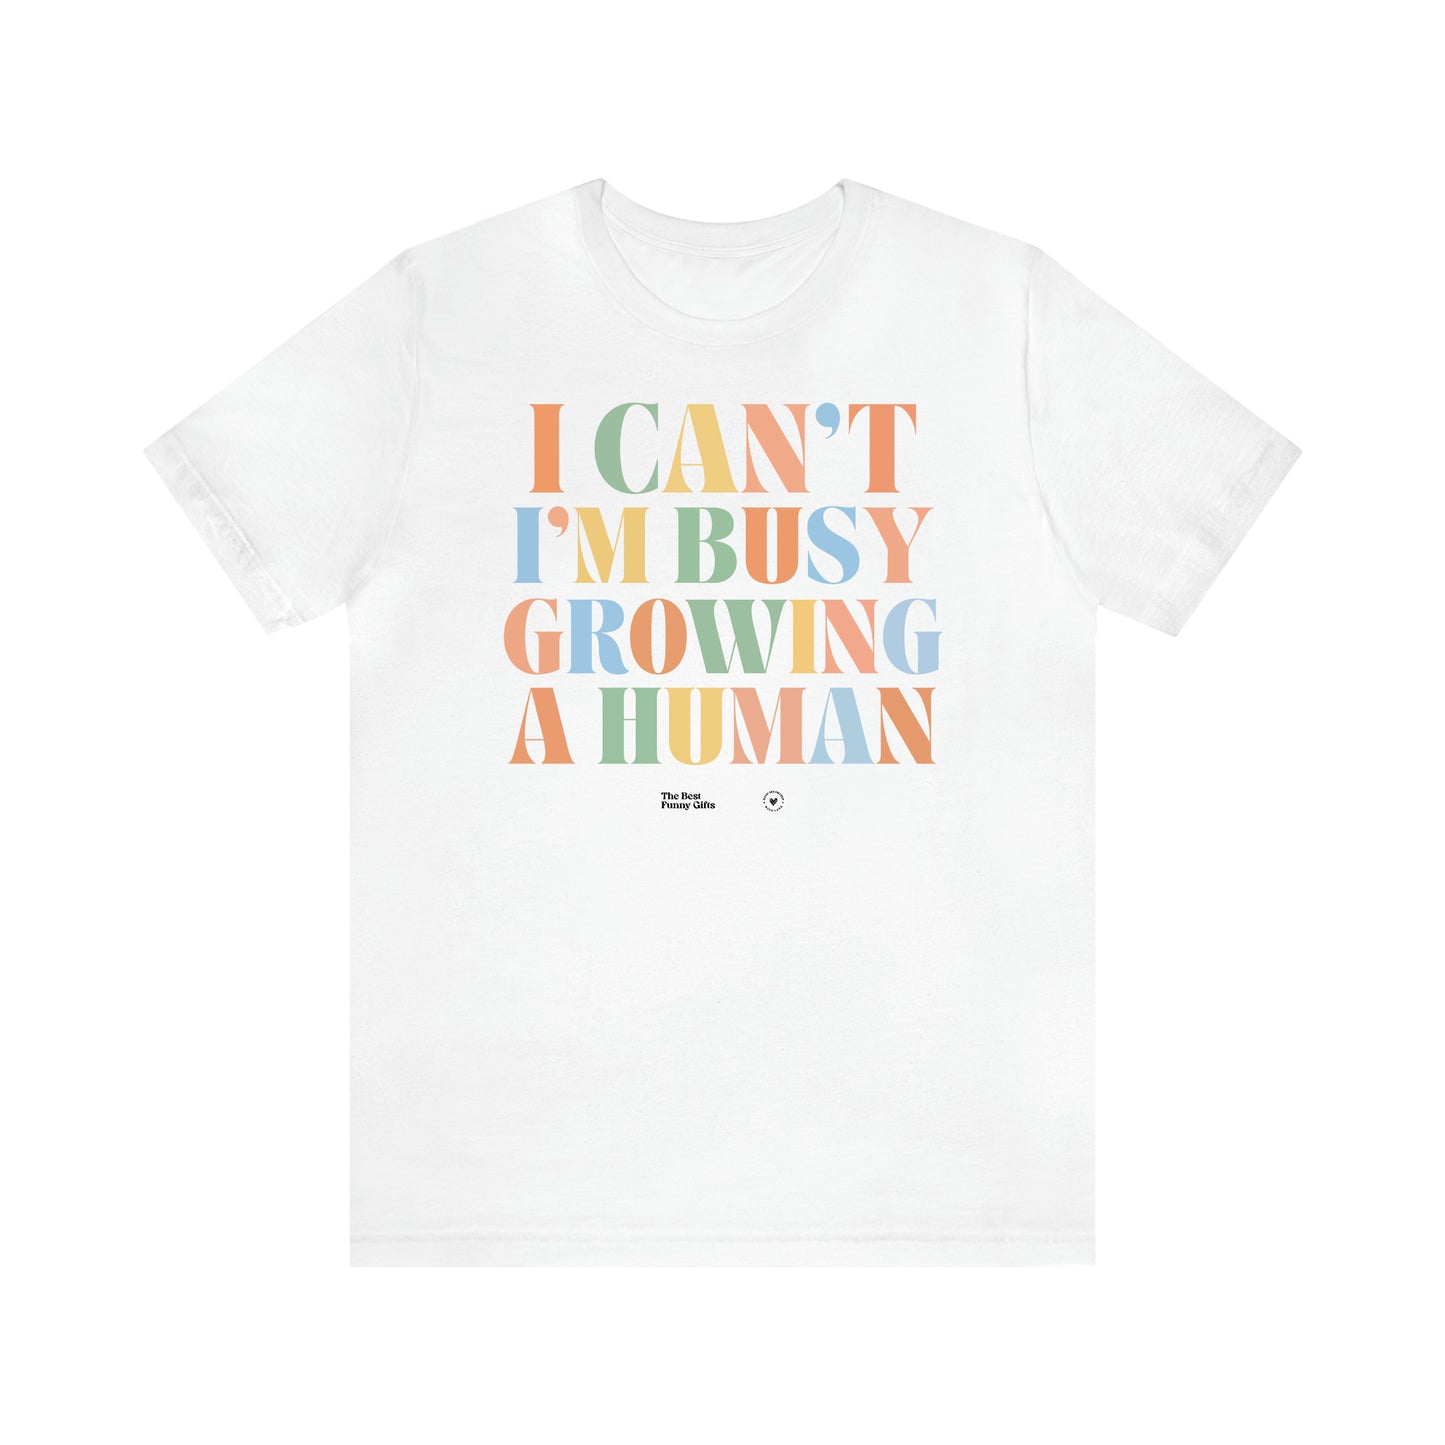 Women's T Shirts I Can't I'm Busy Growing a Human - The Best Funny Gifts